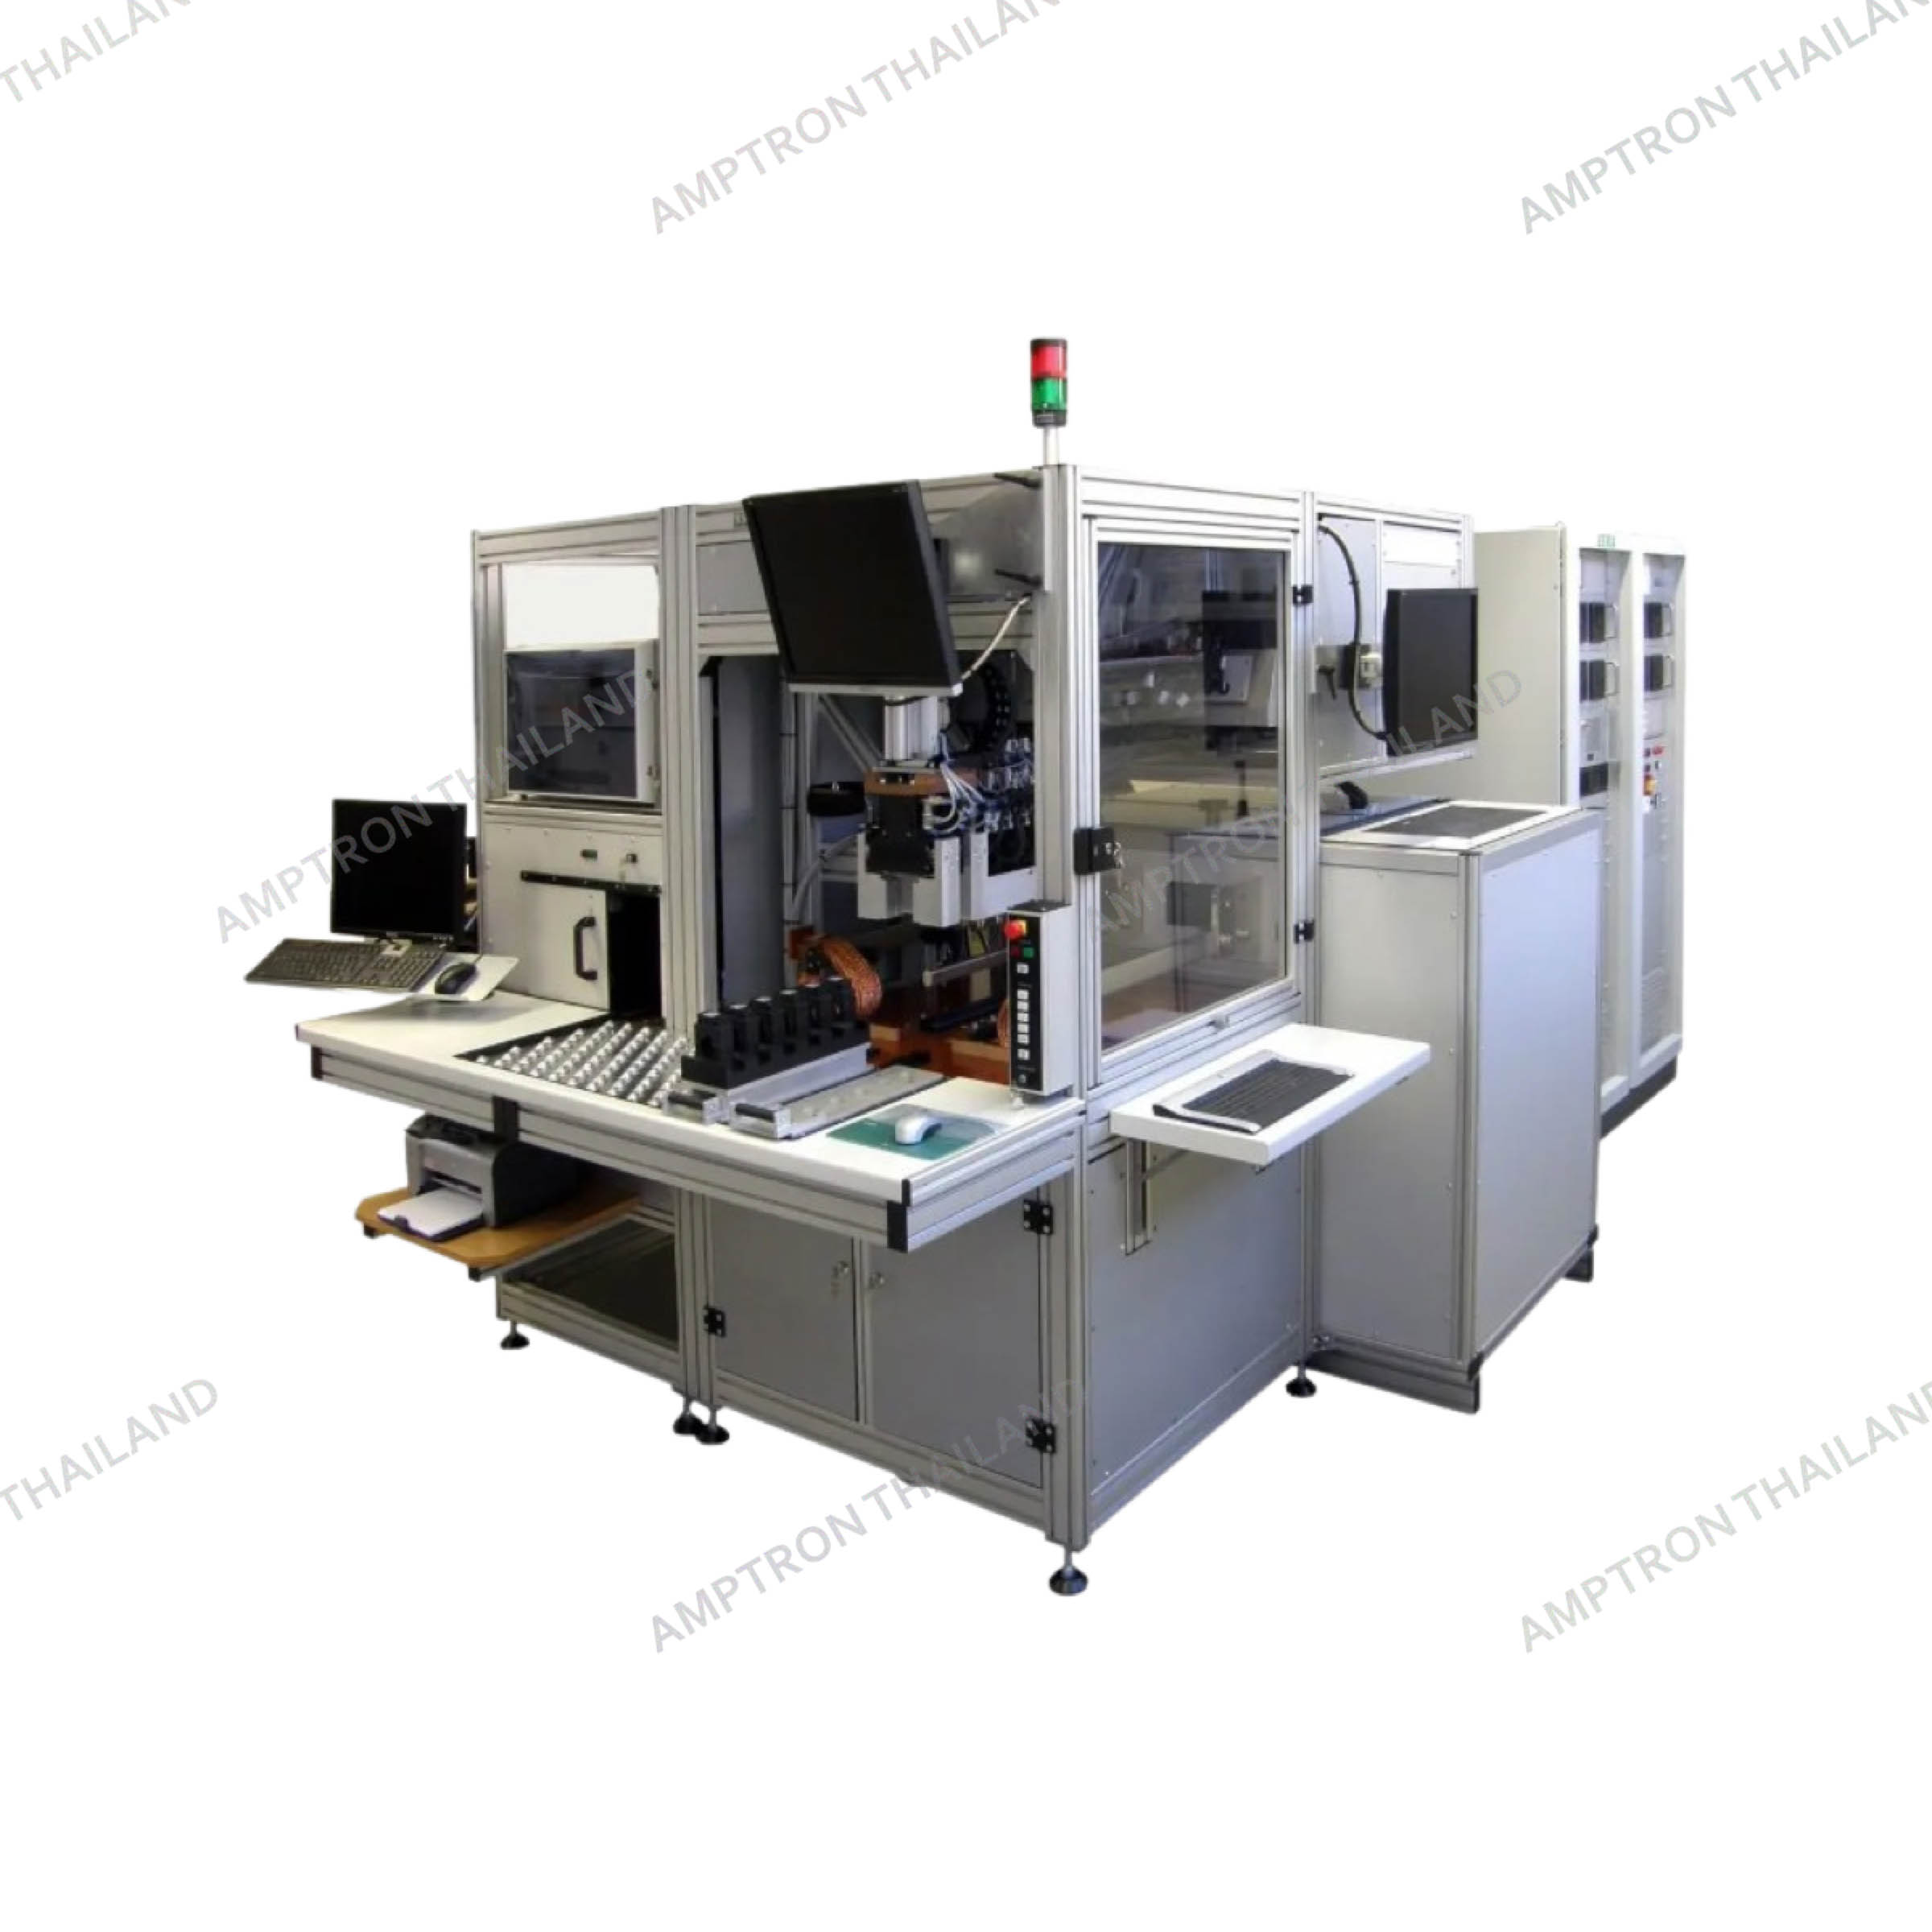 ITTS (CT-80) CT Test System